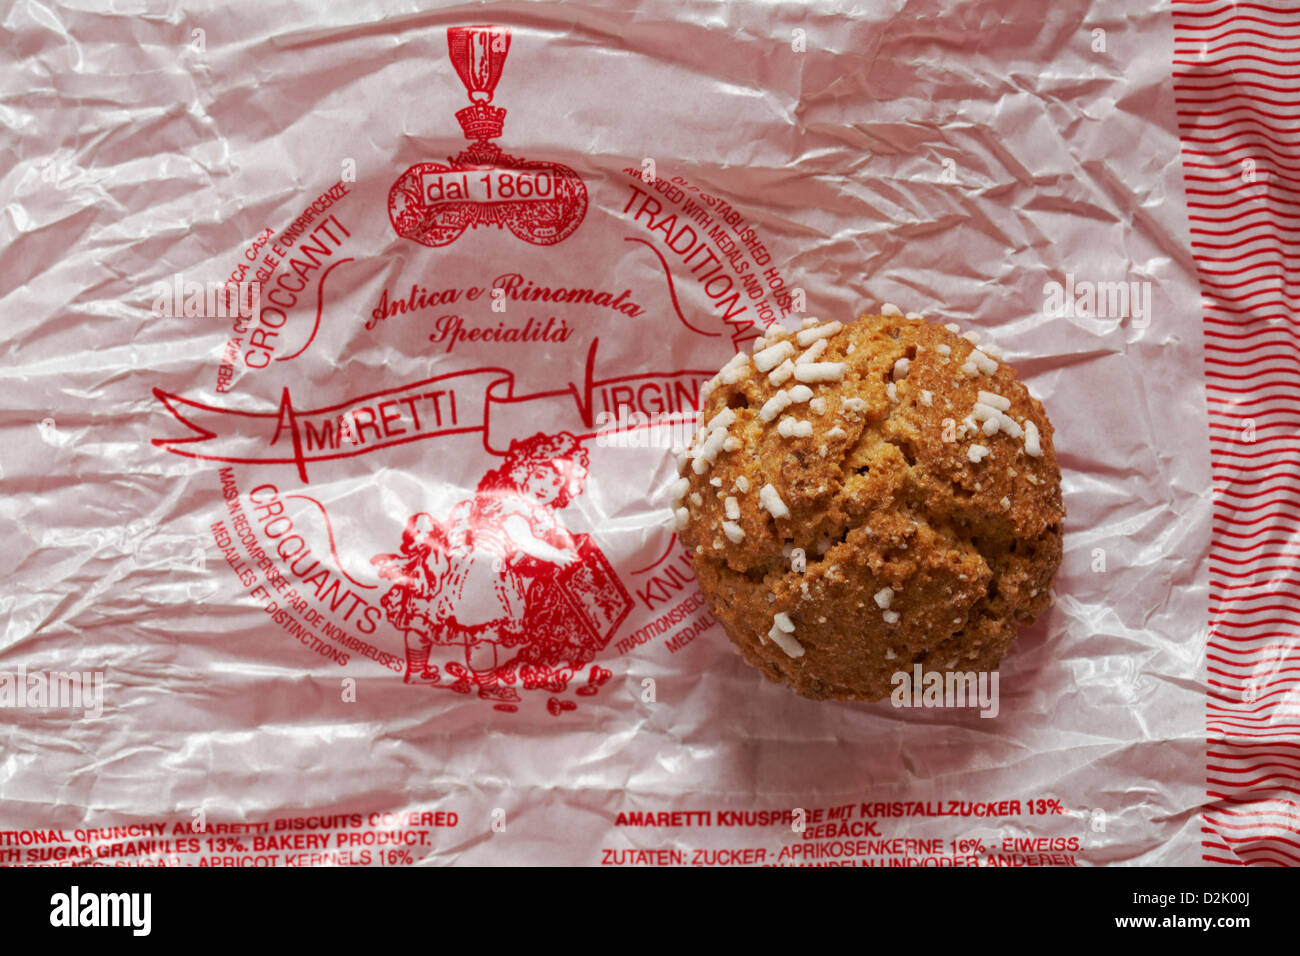 Amaretti Virginia biscuit unwrapped and set on wrapper Stock Photo